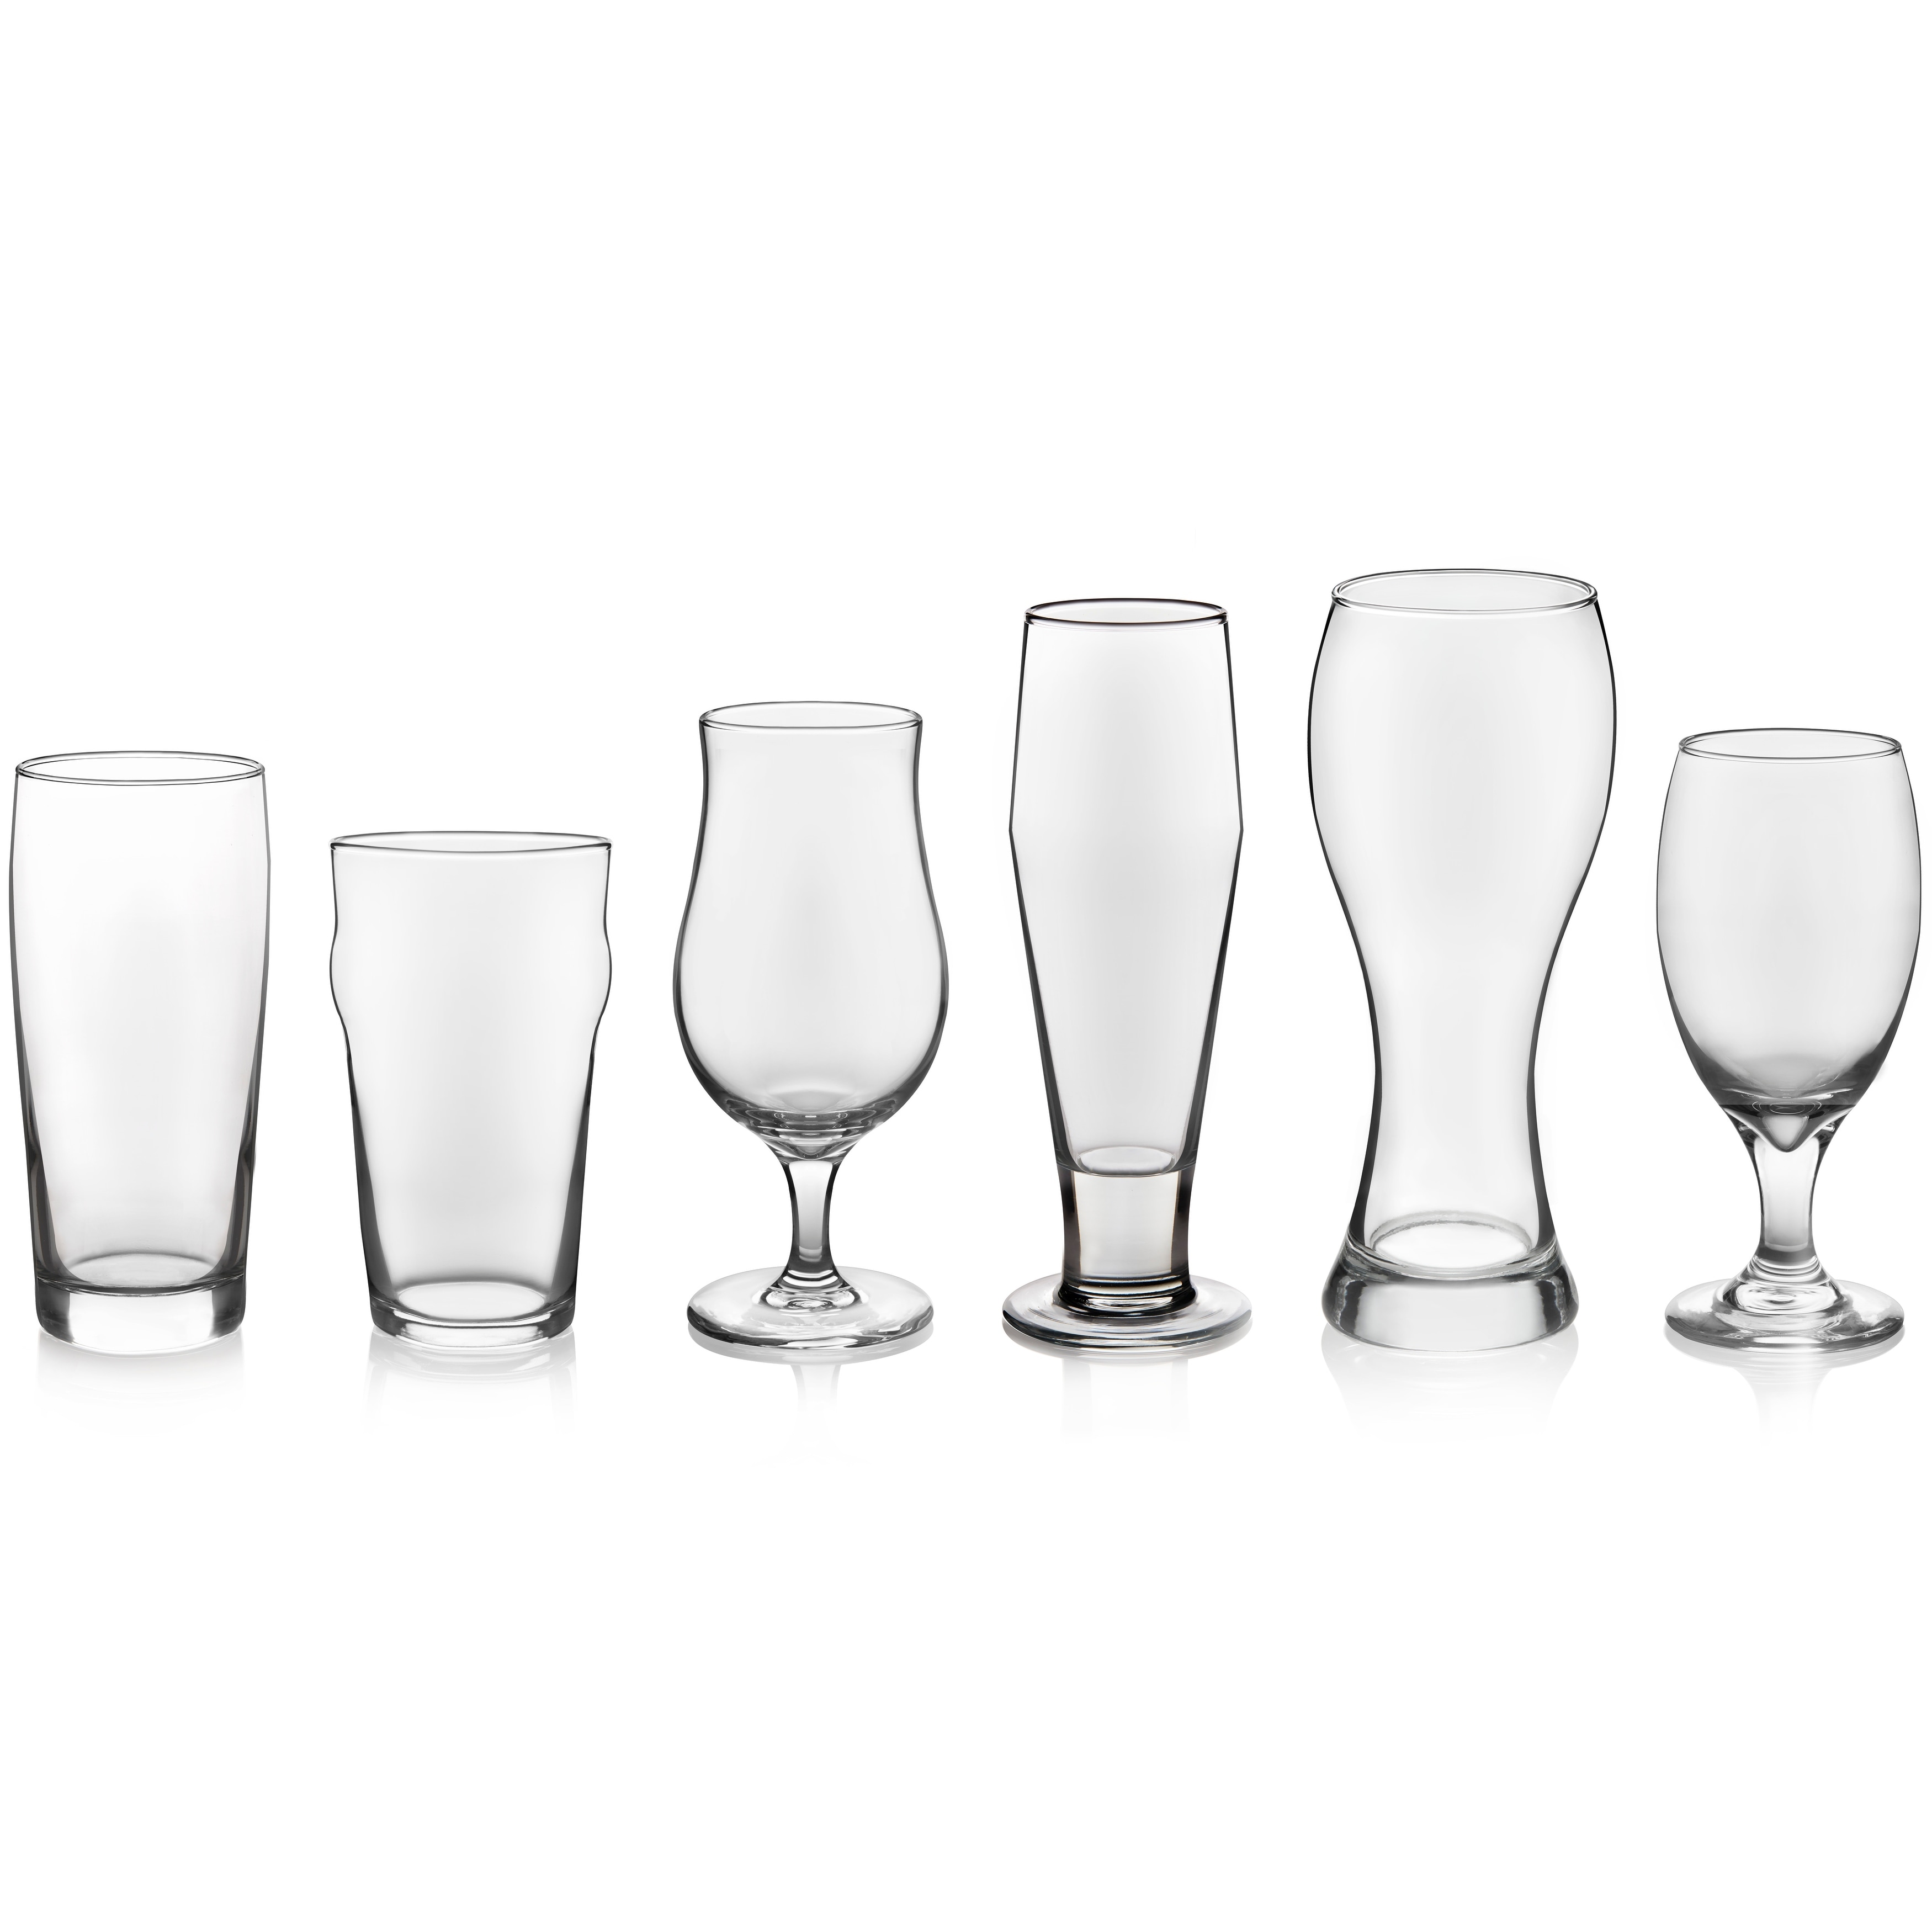 Libbey Craft Brews Nucleated Pint Beer Glasses Set, 4 pk - City Market